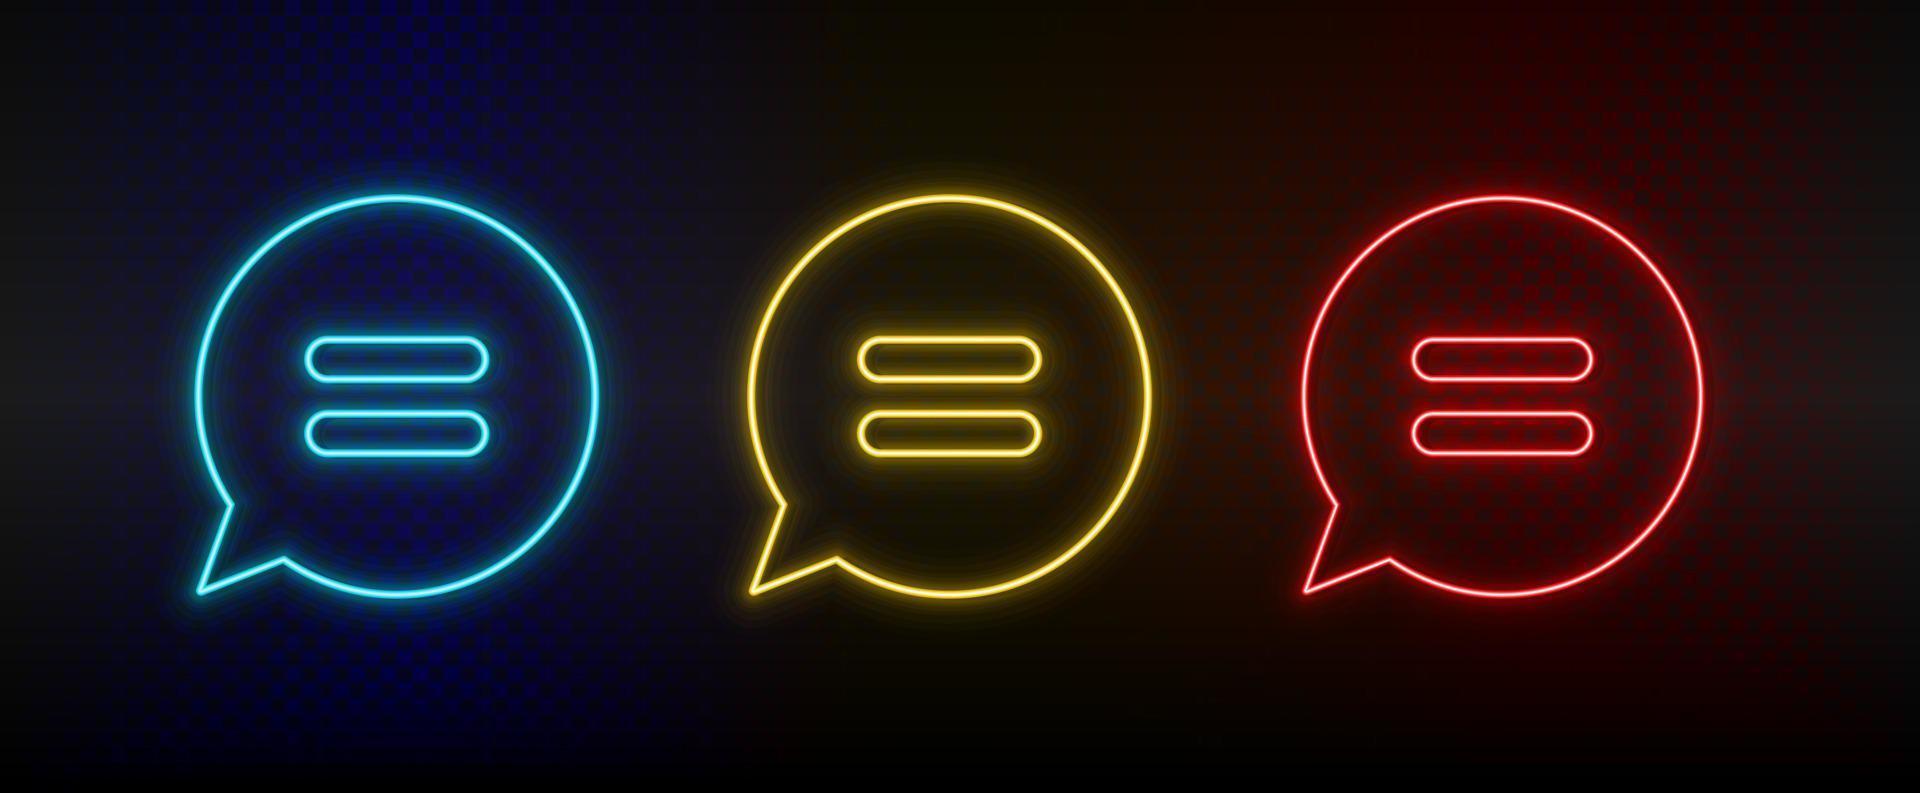 Neon icon set chat, chat bubble. Set of red, blue, yellow neon vector icon on dark transparent background